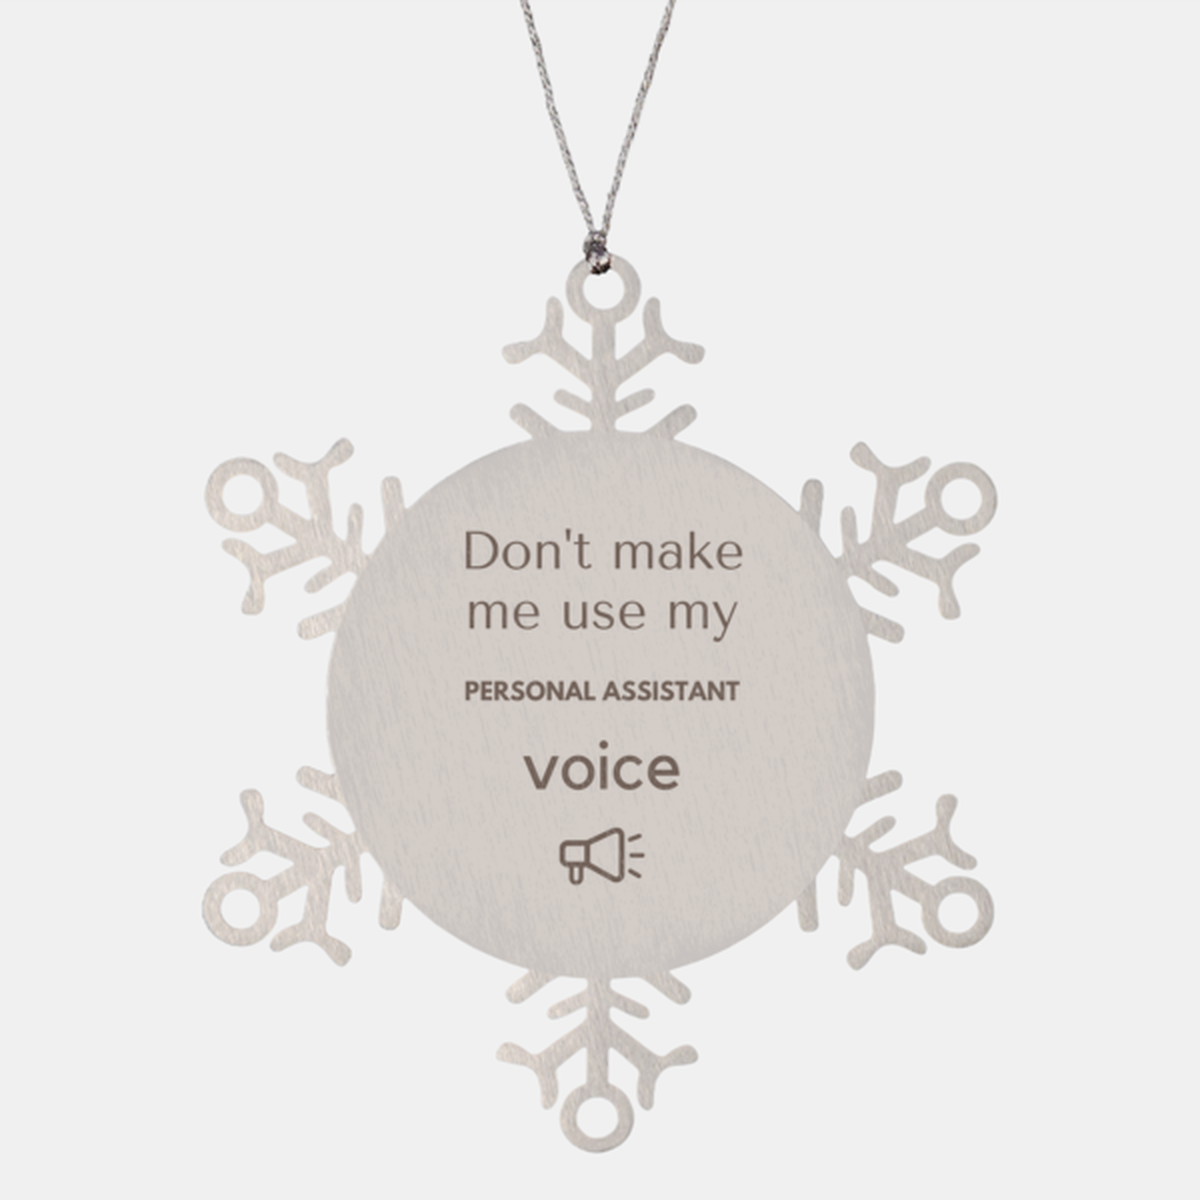 Don't make me use my Personal Assistant voice, Sarcasm Personal Assistant Ornament Gifts, Christmas Personal Assistant Snowflake Ornament Unique Gifts For Personal Assistant Coworkers, Men, Women, Colleague, Friends